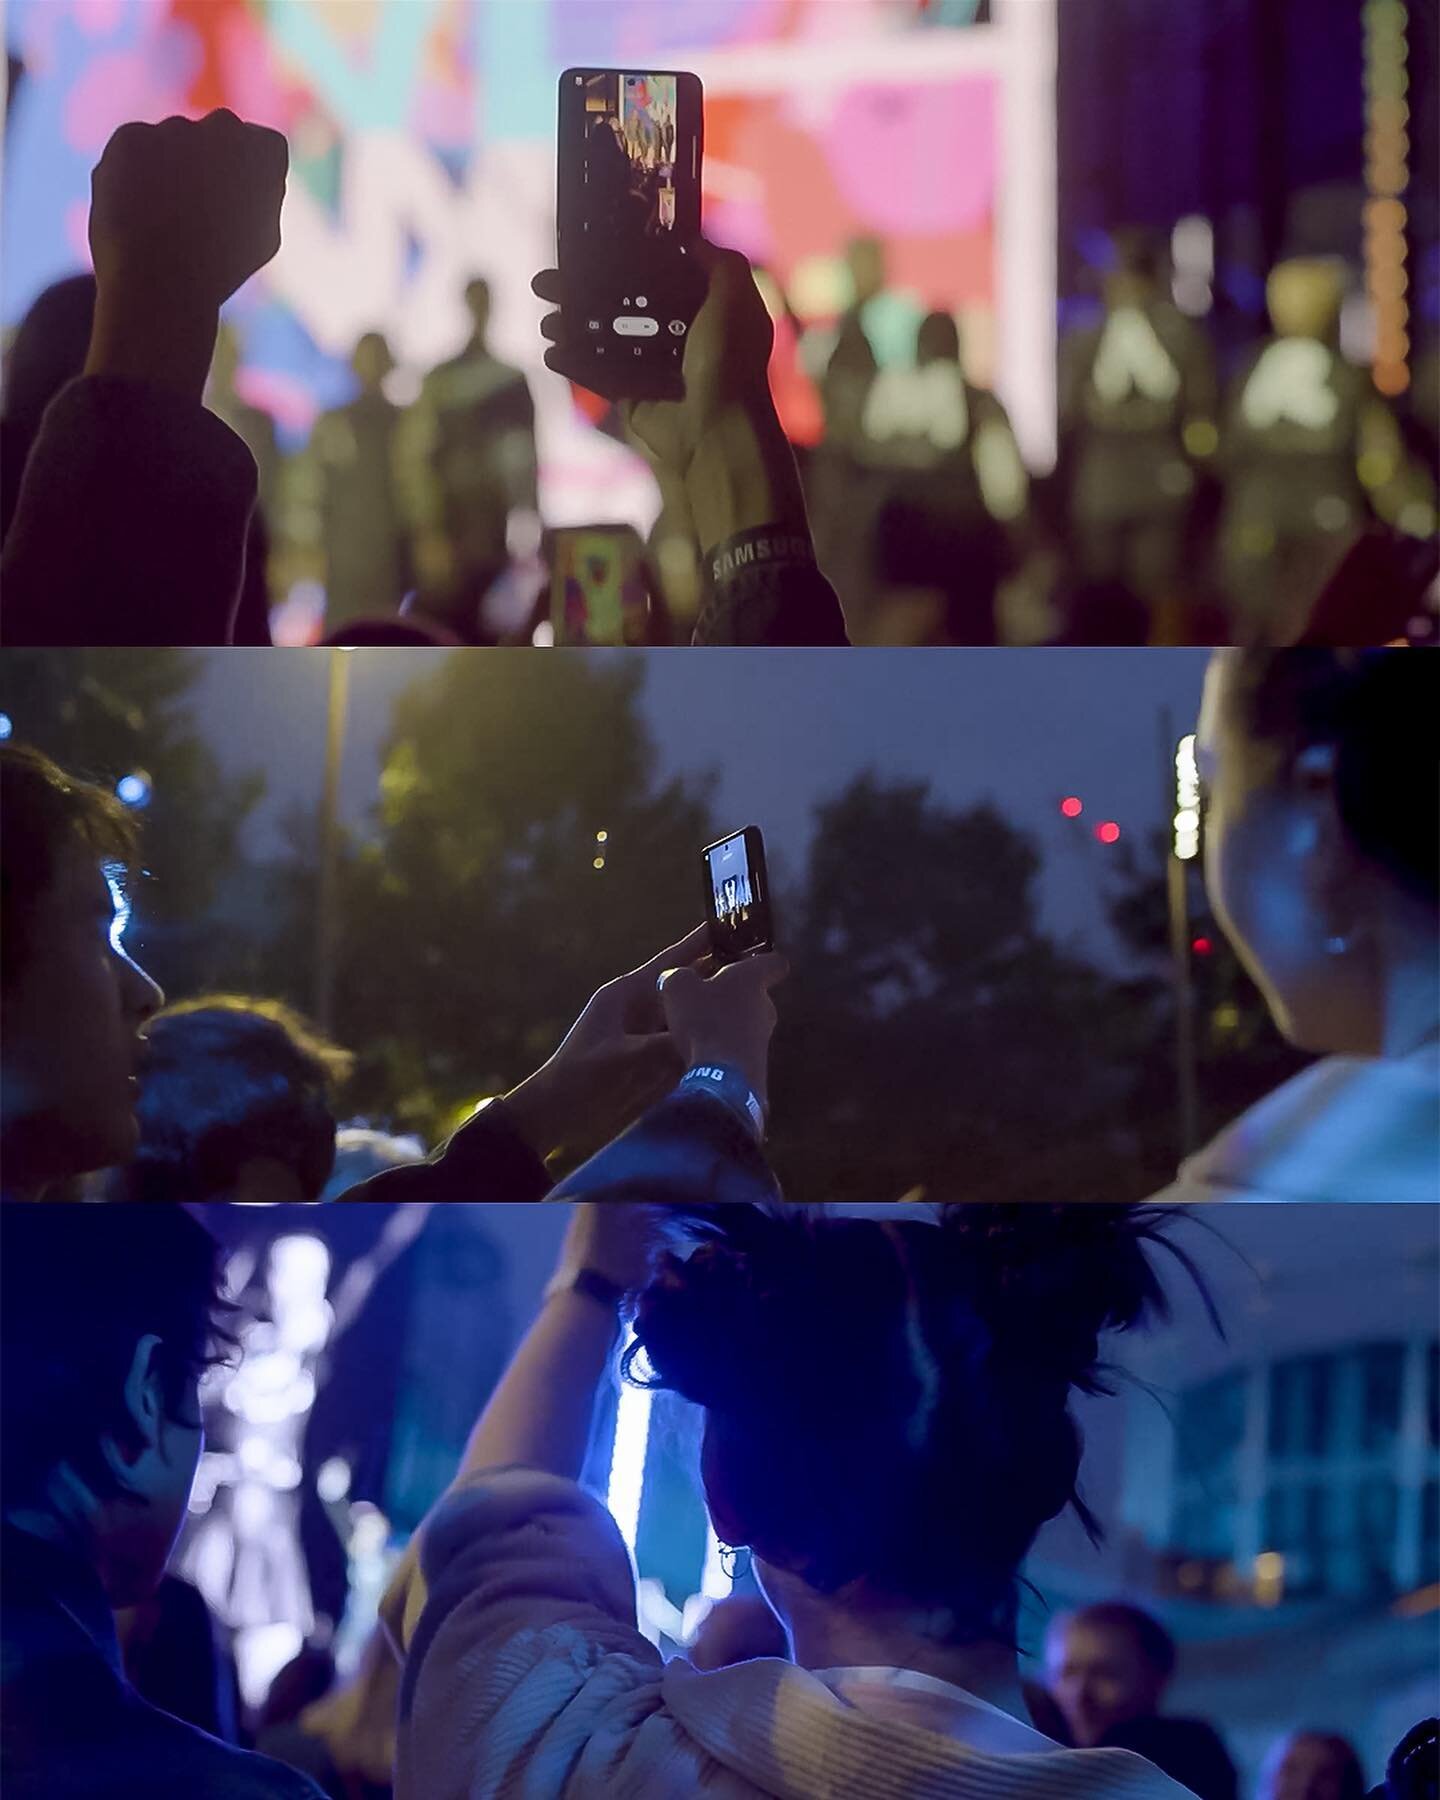 Samsung launched its latest smartphone the 3Fold and to celebrate the launch they hosted a live secret gig in London&rsquo;s Kings Cross in August 2021. The Factory Creative were commissioned to shoot BTS footage of the new smartphone at the gig, how